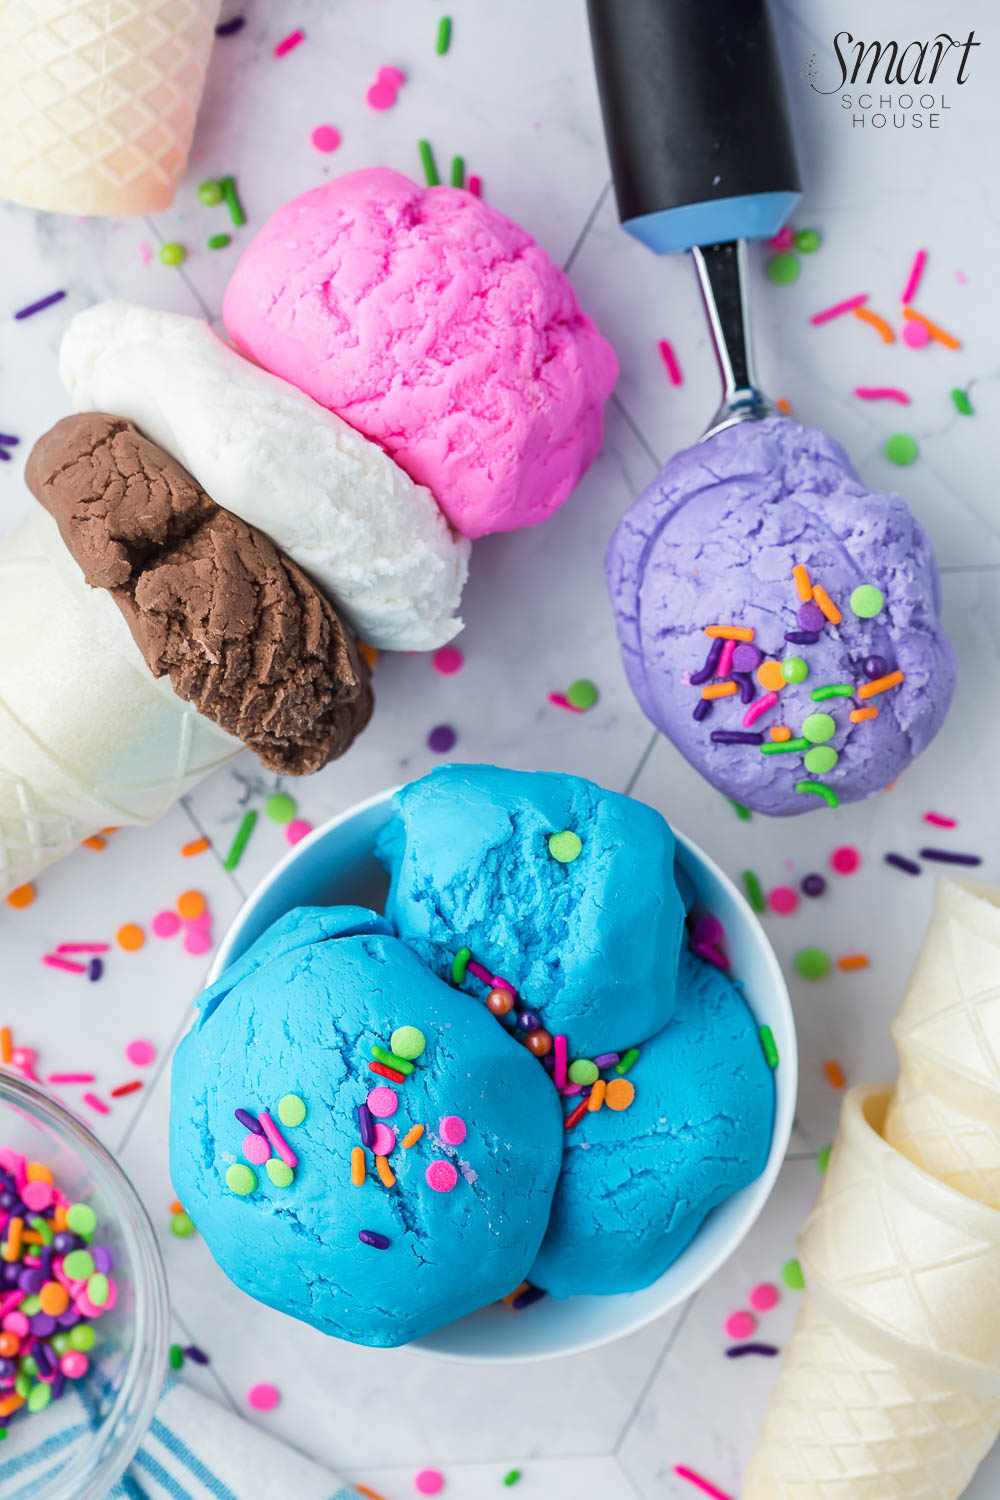 2-Ingredient Ice Cream Play Dough is edible, it's soft, and it looks and moves EXACTLY like ice cream! Make it any color with frosting!